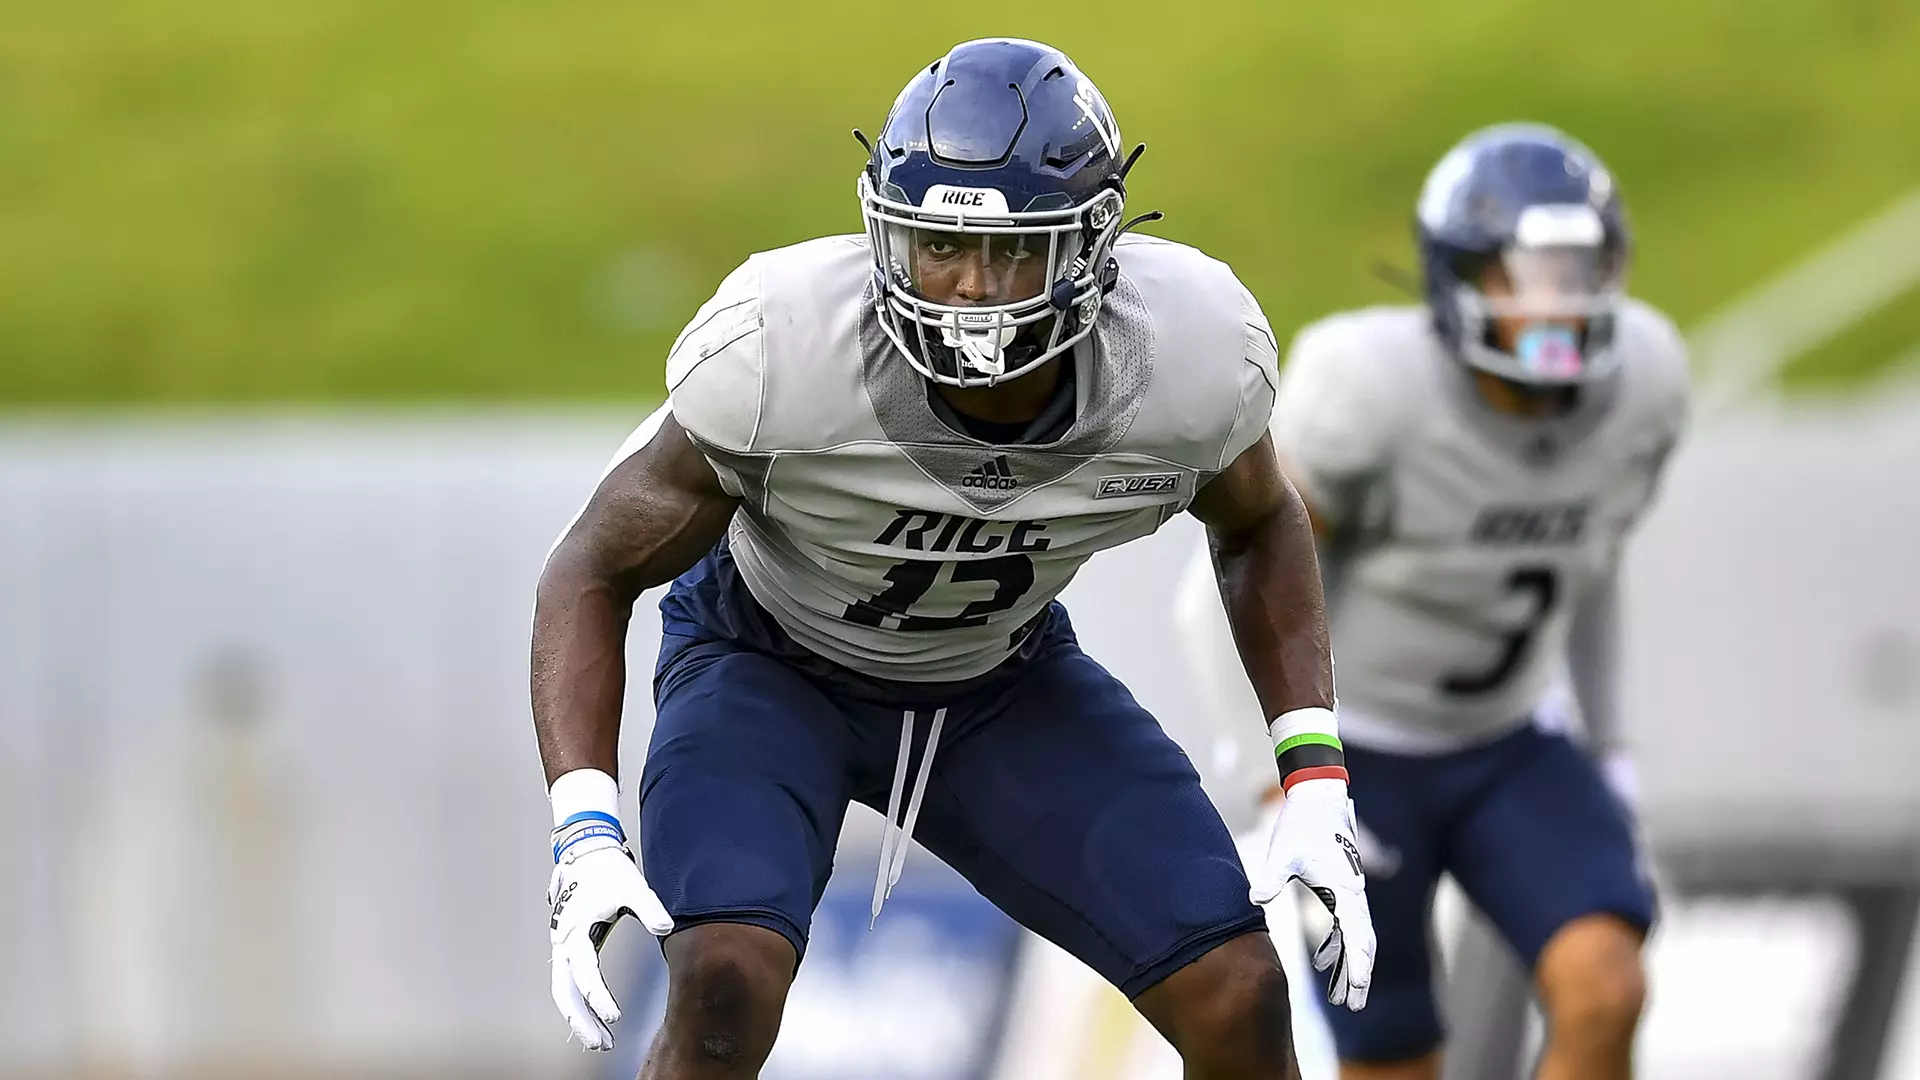 Josh Pearcy is a relentless edge rusher at Rice University with excellent lateral quickness. Hula Bowl scout Ian McNice breaks down Pearcy as an NFL Prospect in his report.